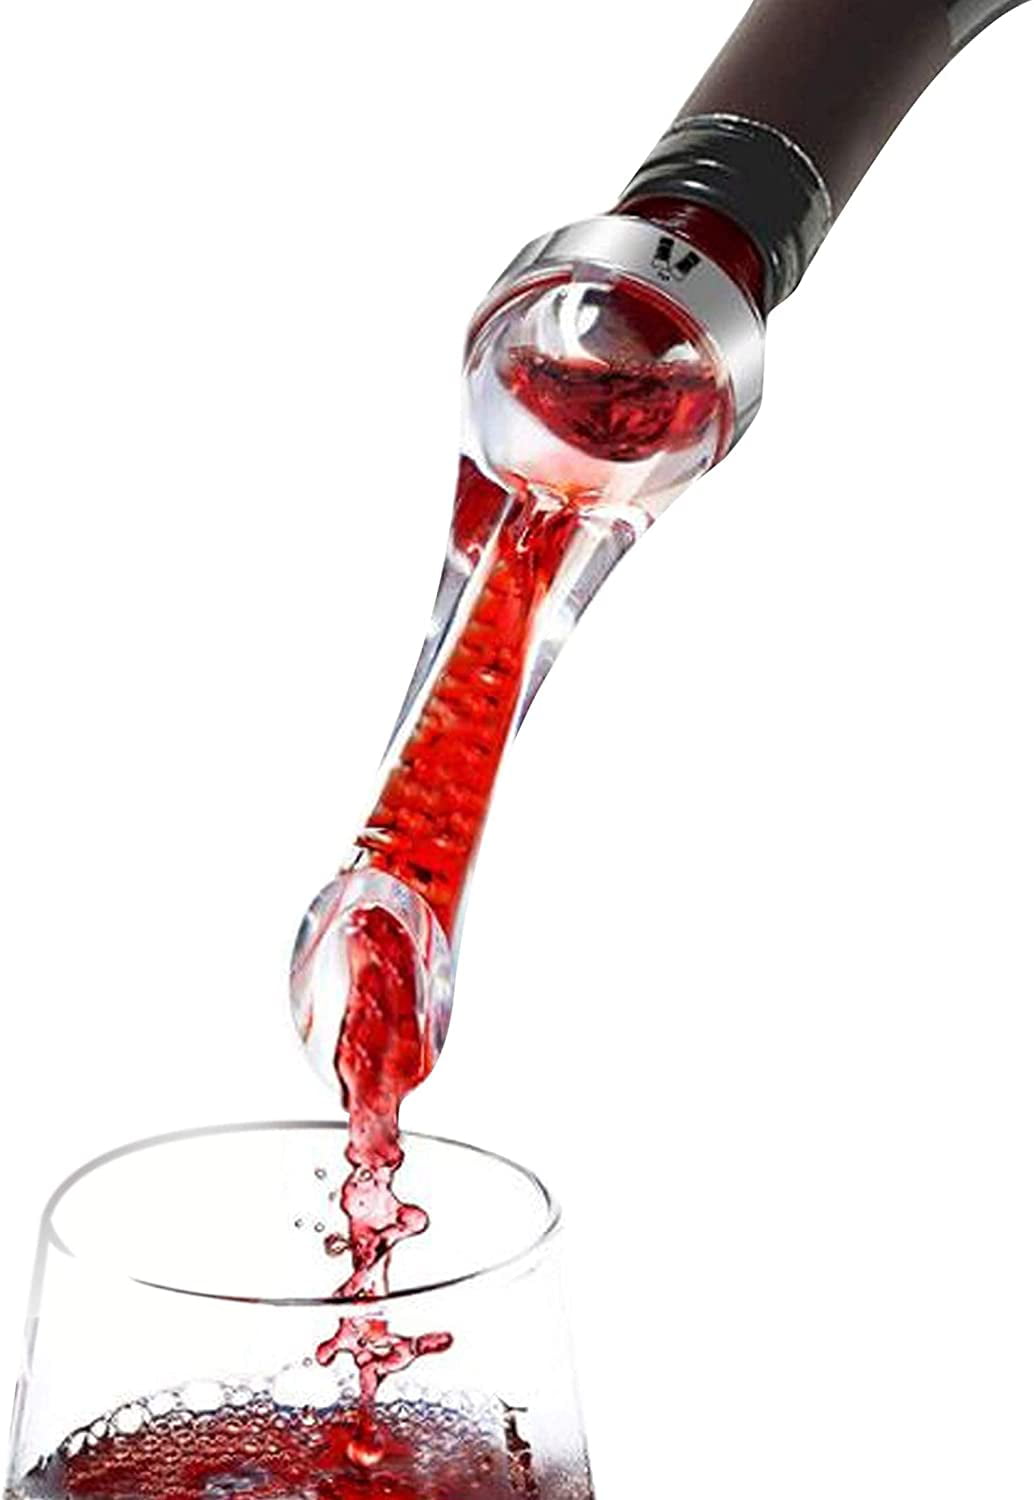 Southern Homewares Simple Wine Aerator and Pourer Wine tastes and pours better 